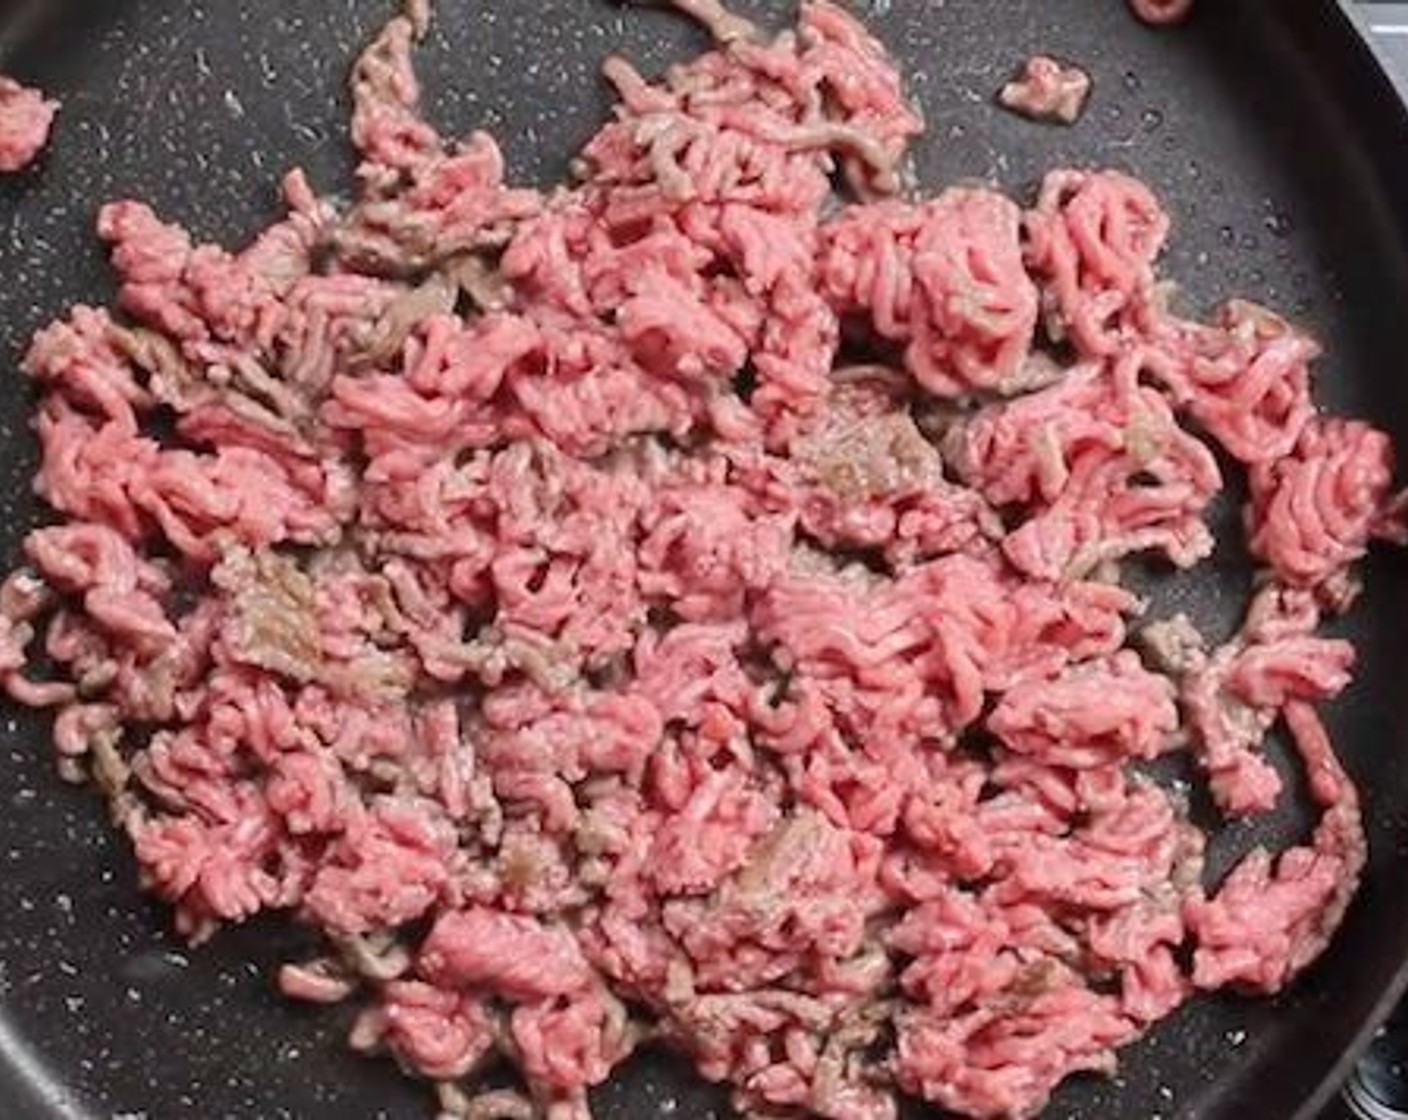 step 1 In a pan over medium to high heat add Ground Beef (1 lb). Break the beef down to small clumps and brown for 3-4 minutes.